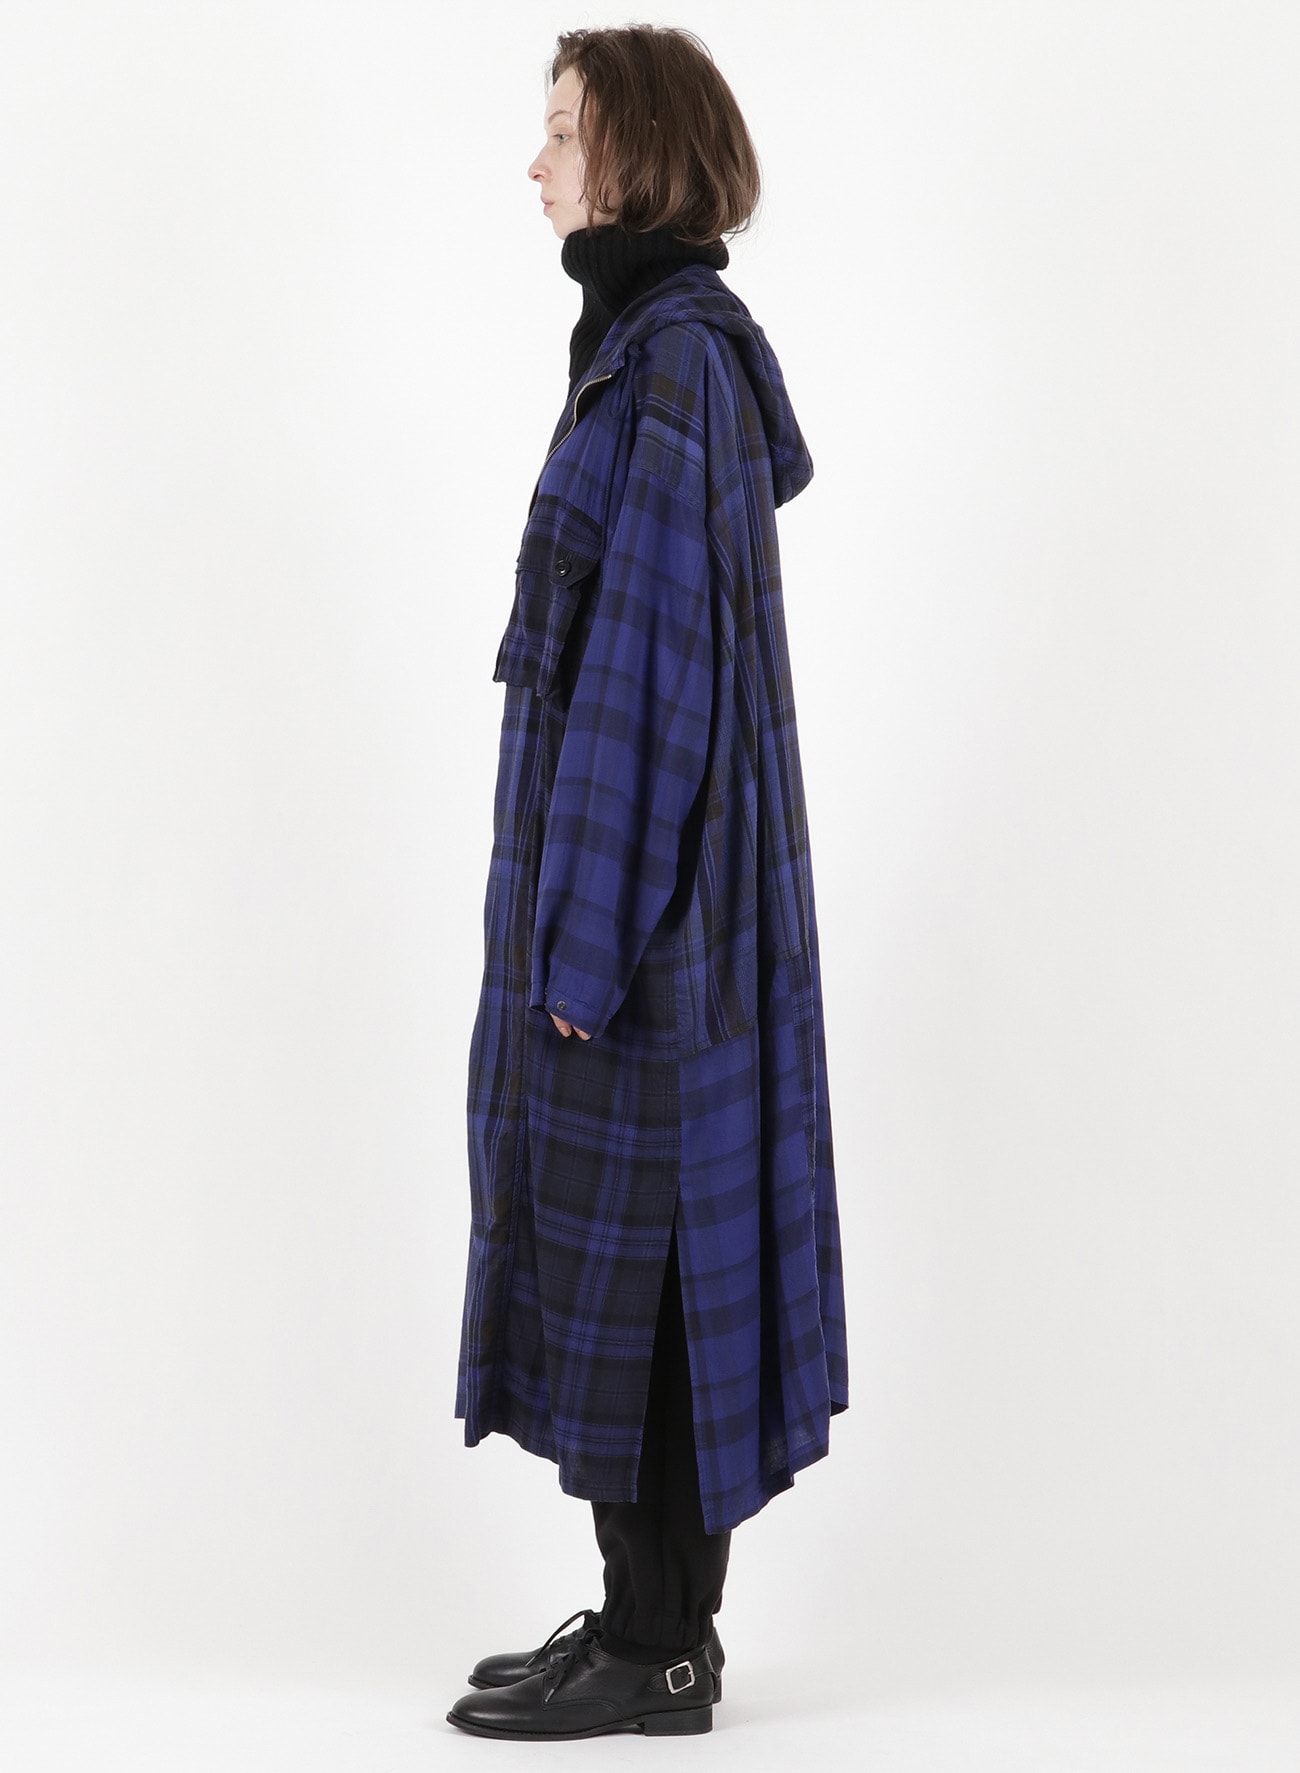 TWILL CHECKED HOODED COAT DRESS